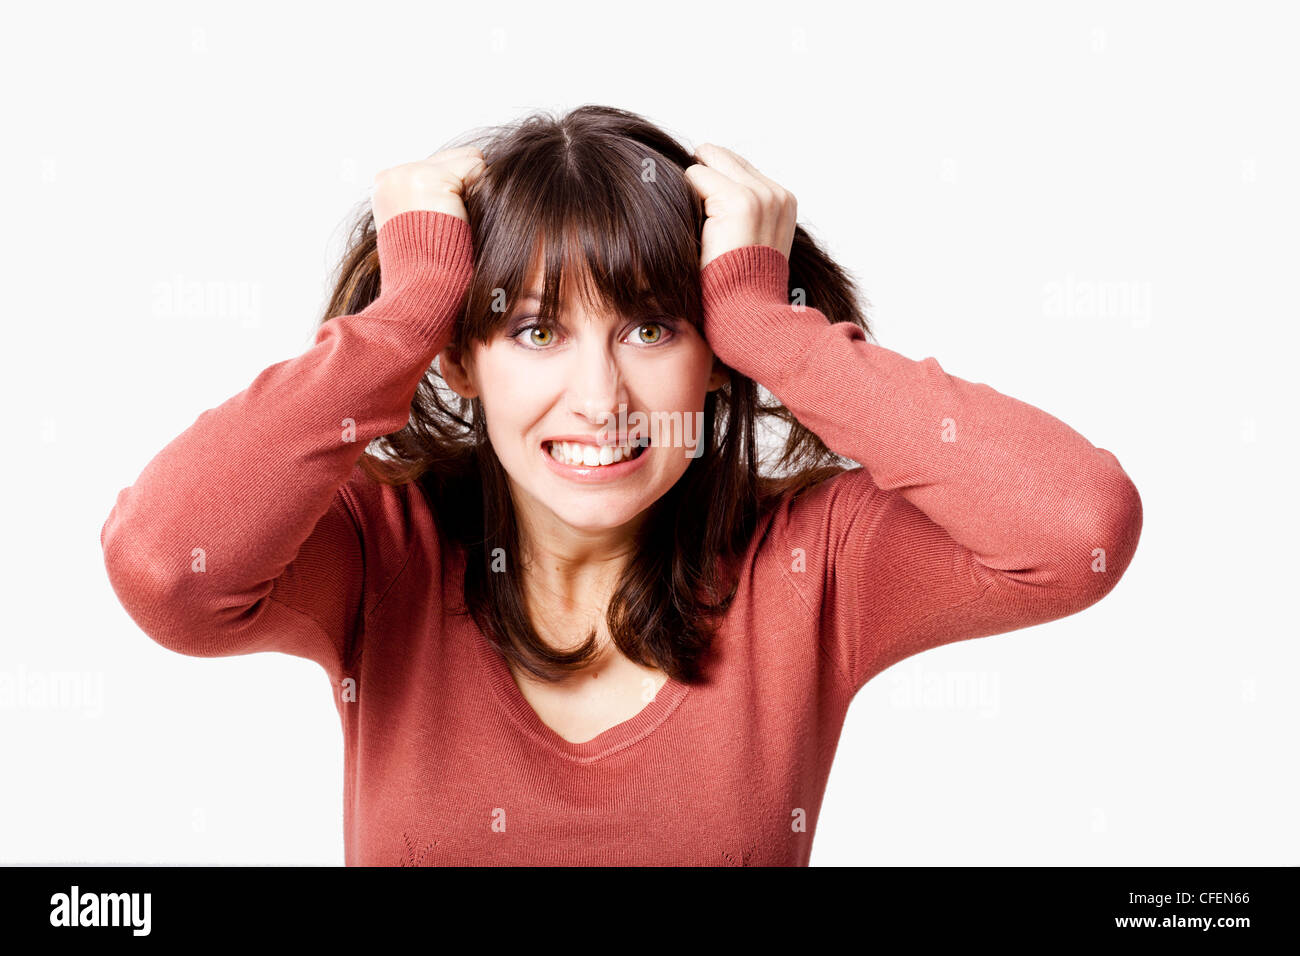 Portrait of a stressed young woman pulling her hair out, isolated over a gray background Stock Photo